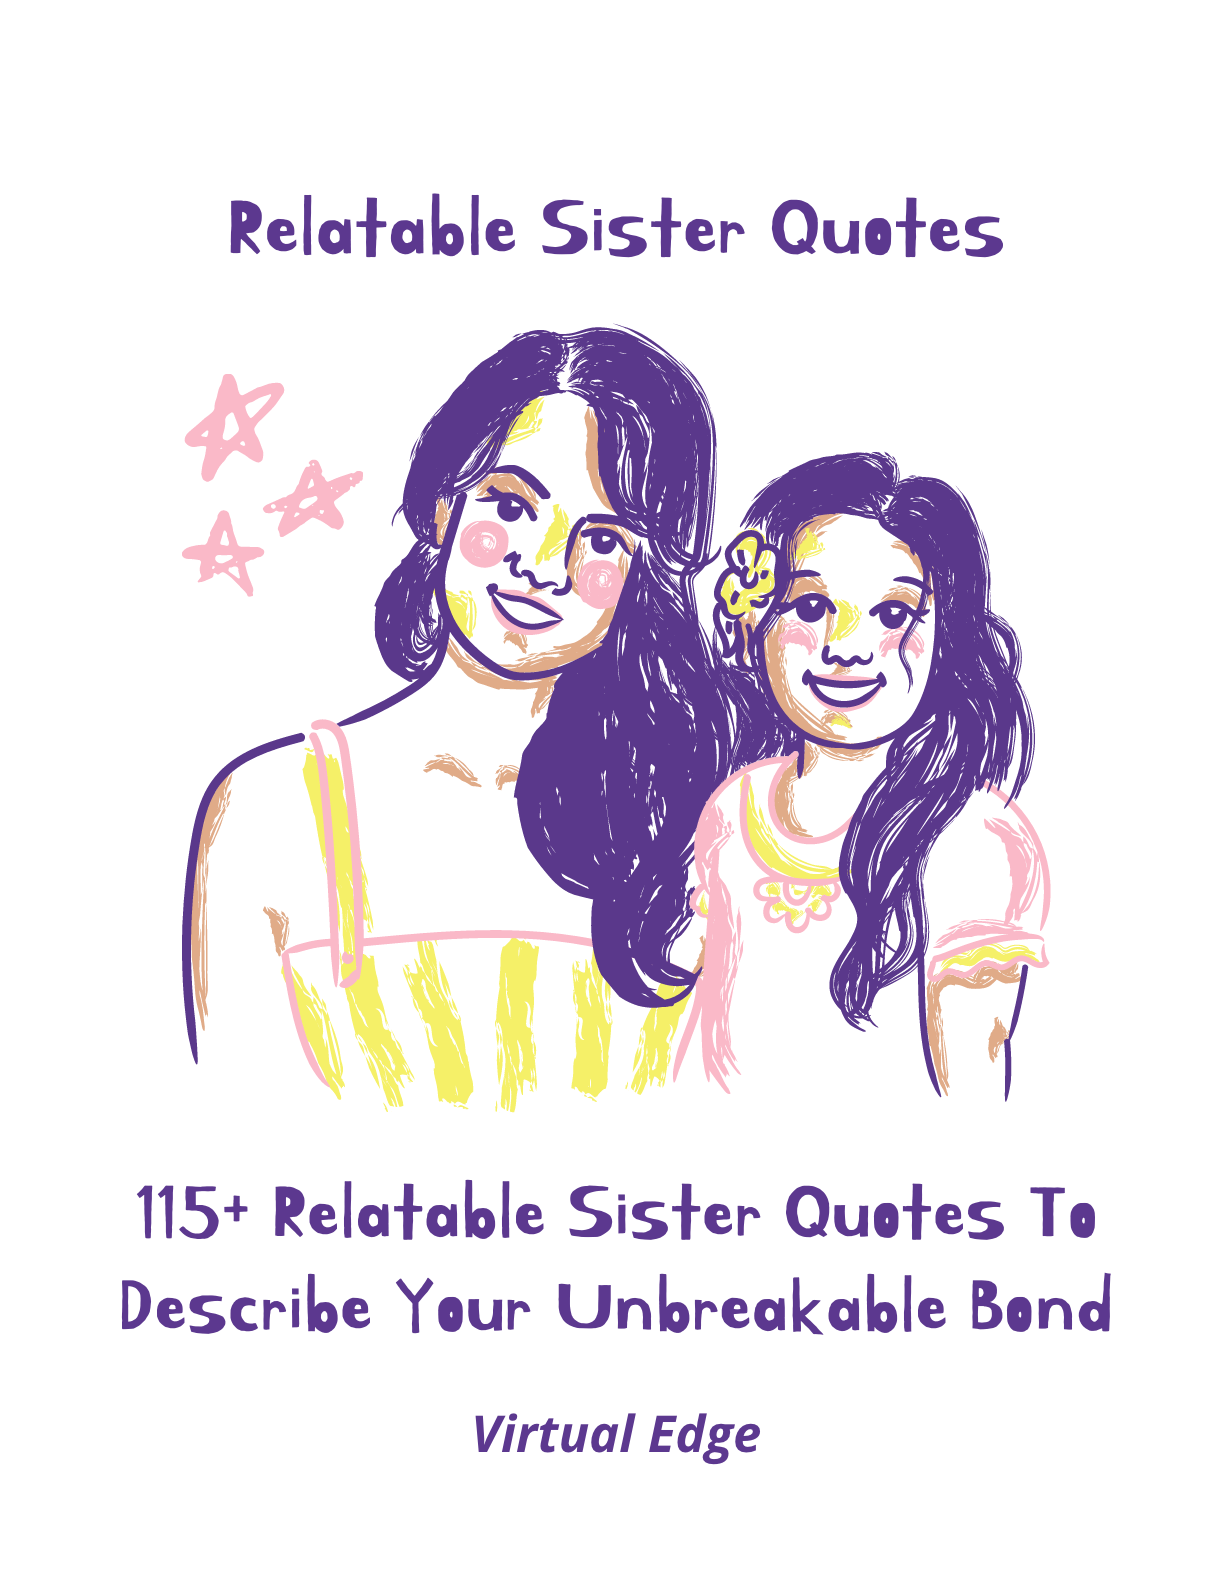 125 Relatable Sister Quotes To Describe Your Unbreakable Bond Virtual Edge